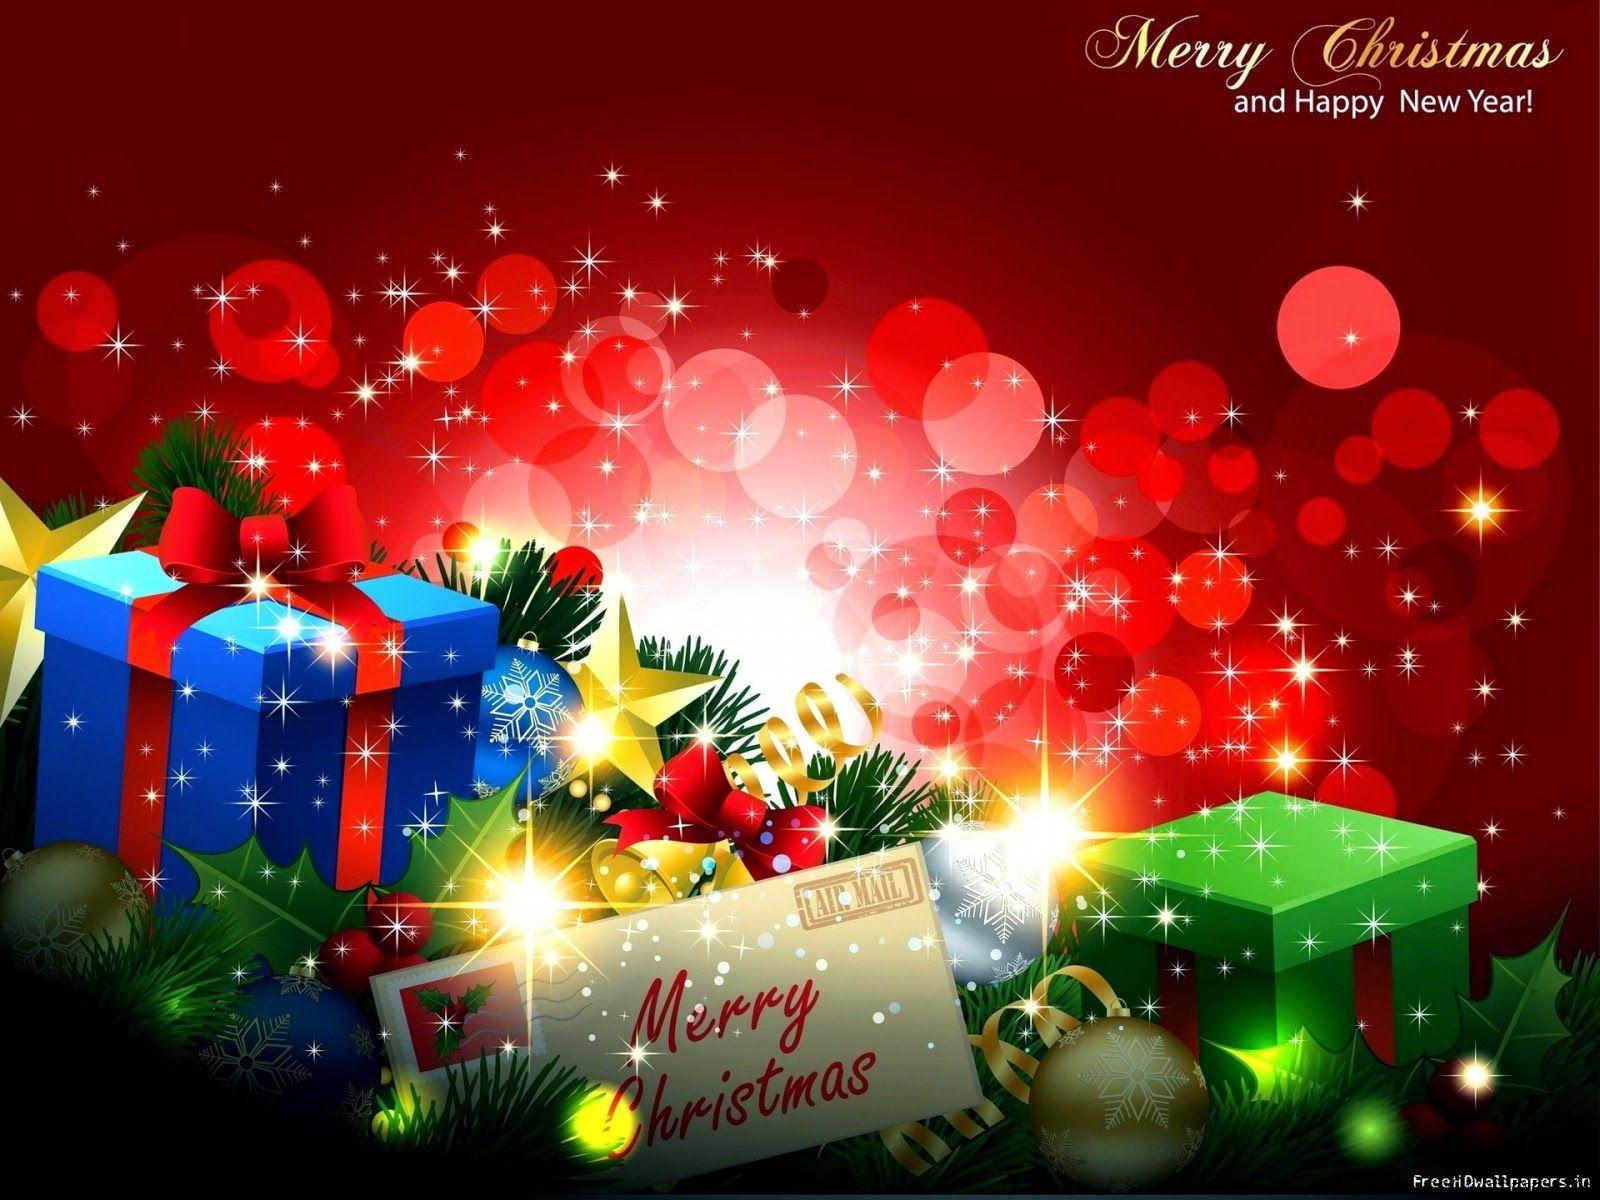 Merry Christmas and Happy New Year 2019 Image & Wallpaper. New